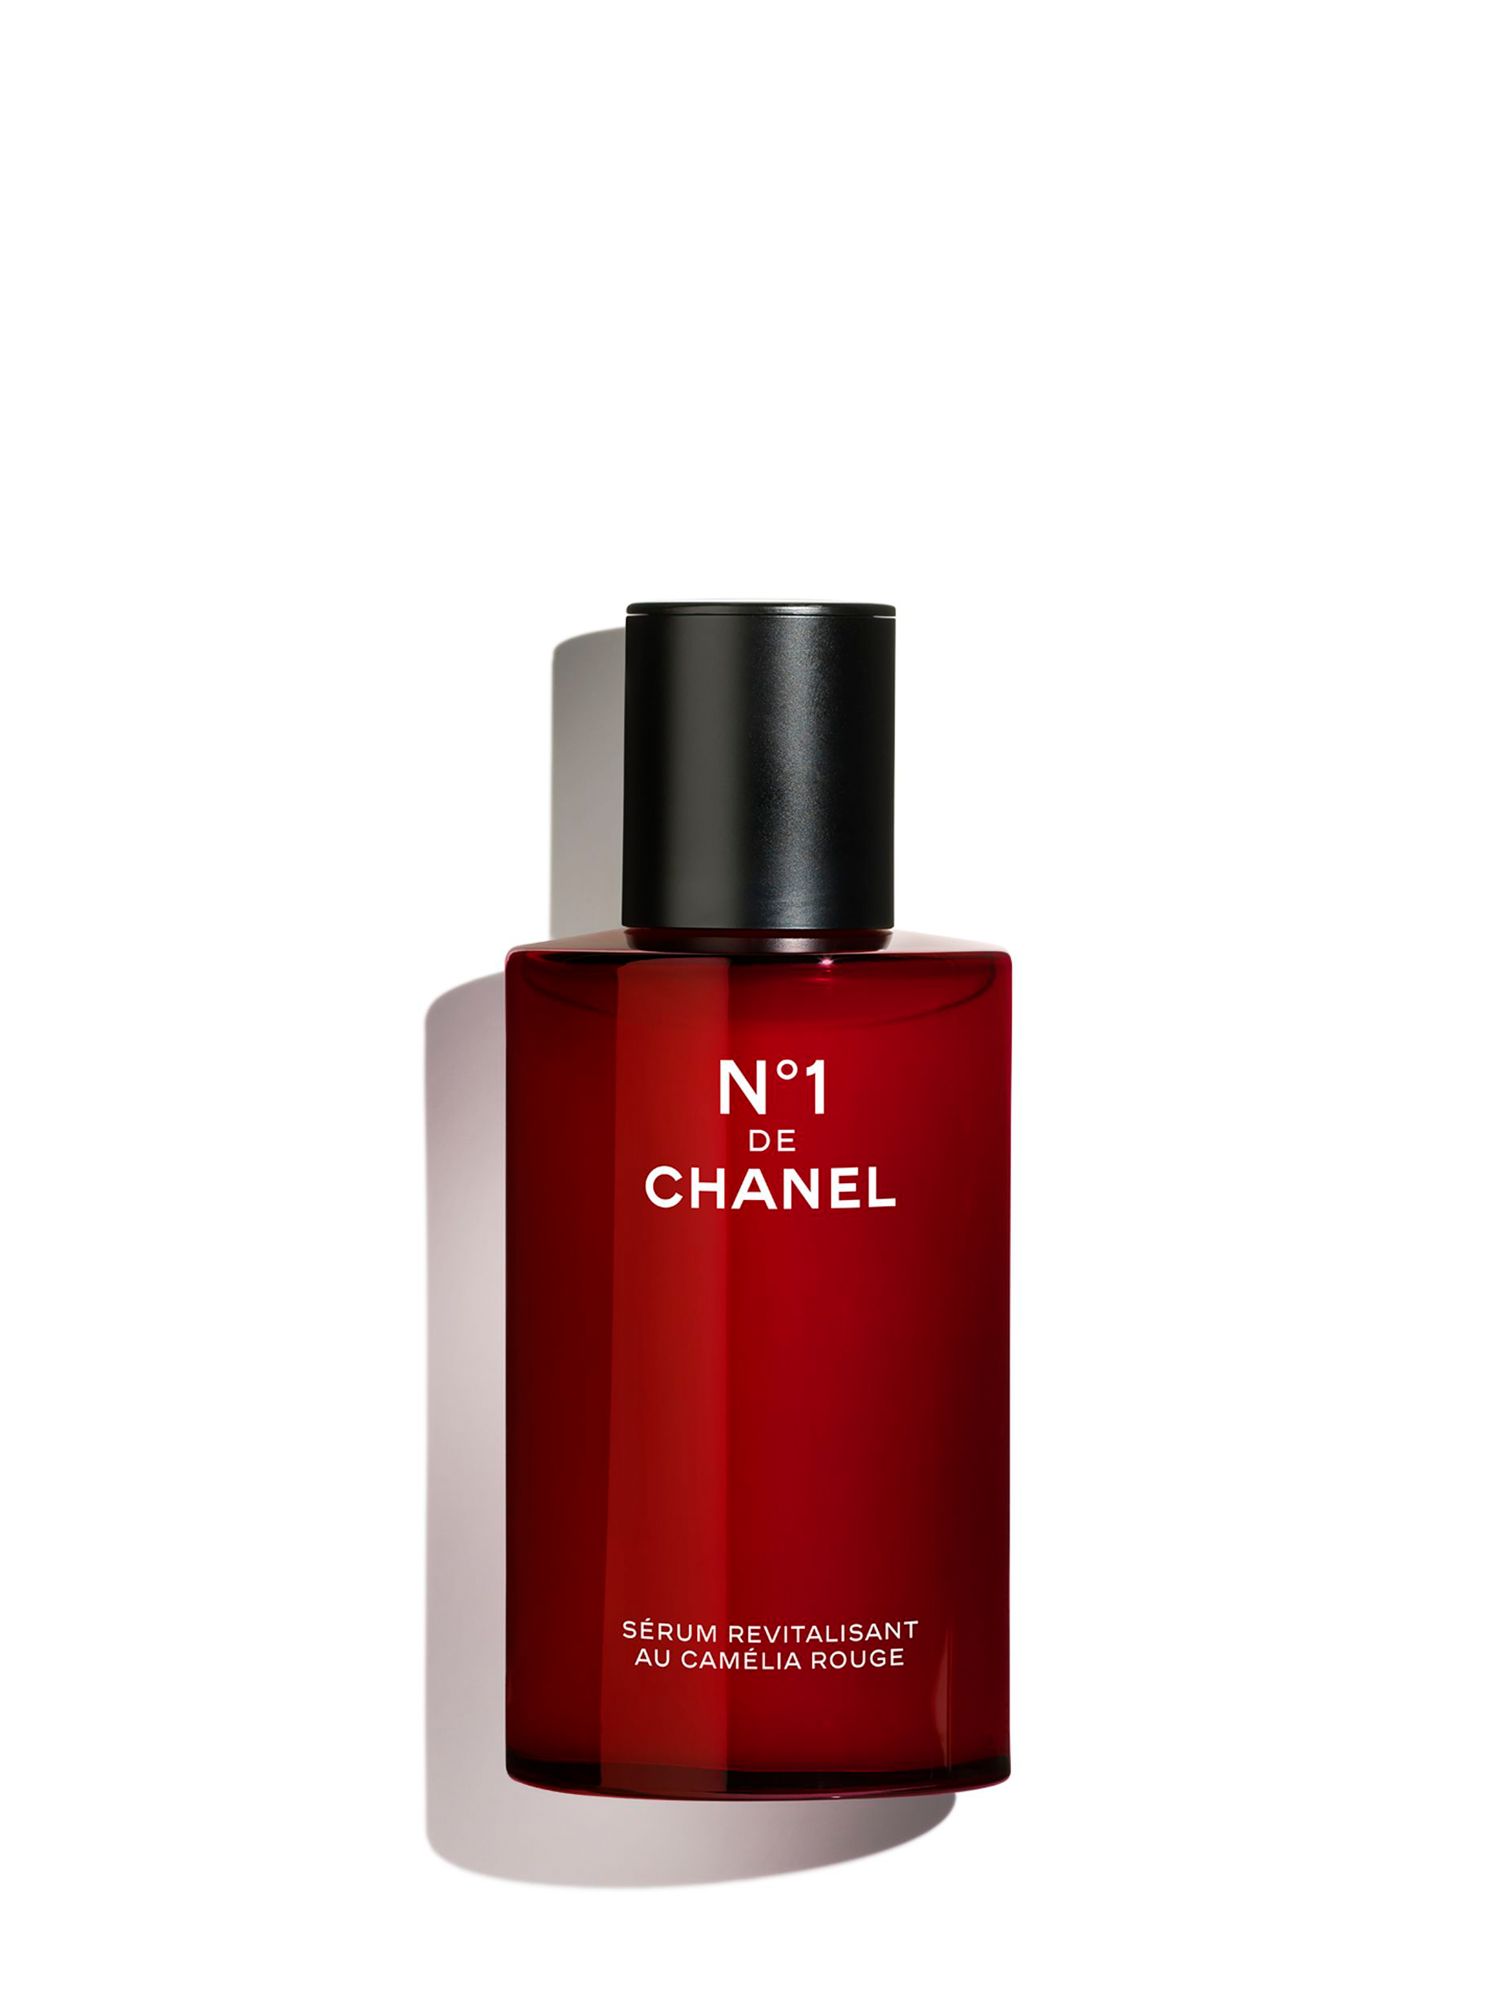 CHANEL N°1 De CHANEL Revitalising Serum Smooths And Provides Radiance, For Younger-Looking Skin, 100ml 1